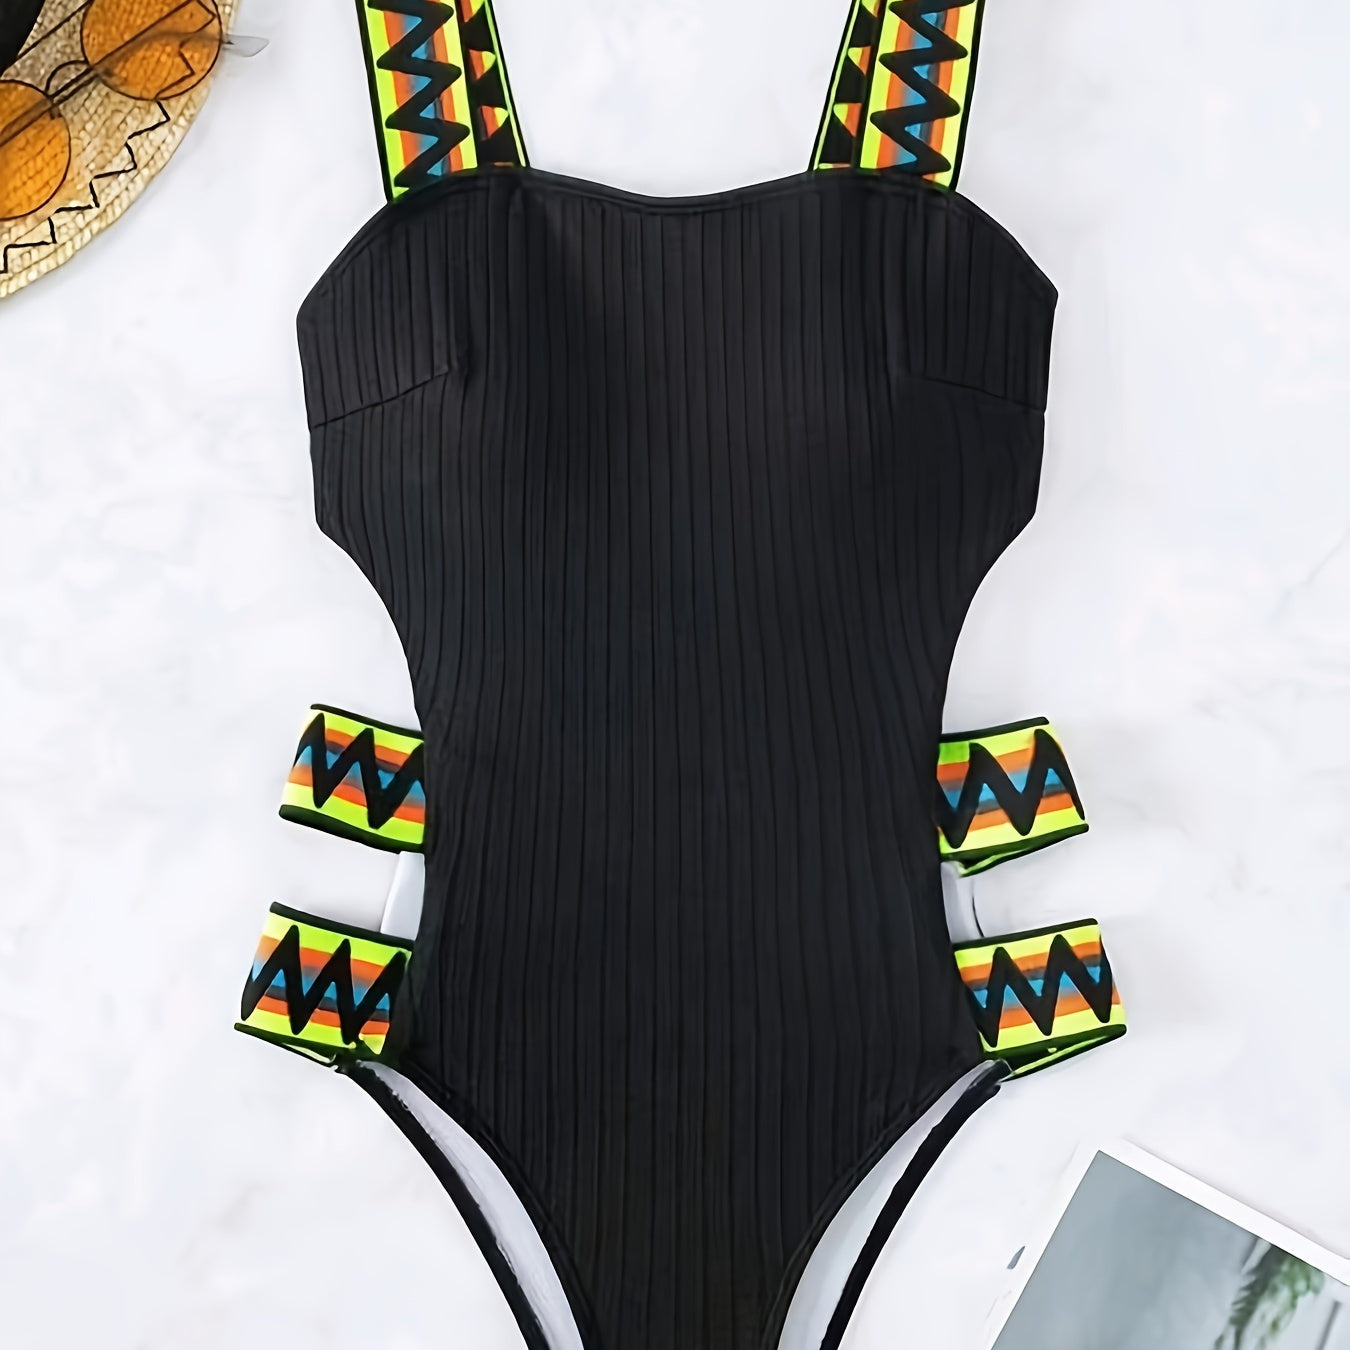 Zigzag Contrast Strap Textured Fabric Black One-piece Swimsuit, Hollow Out Color Block High Stretch Bathing Suits, Women's Swimwear & Clothing